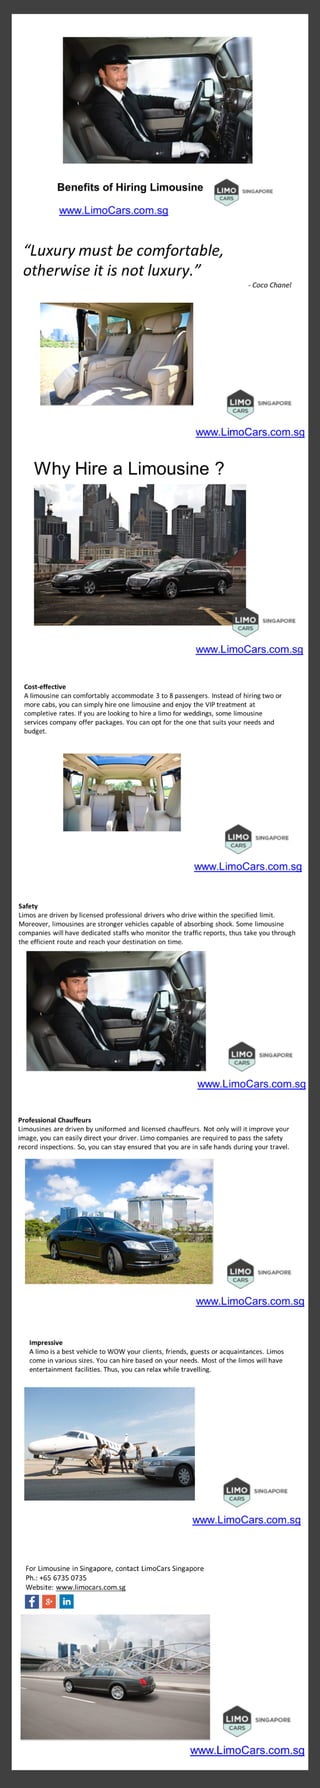 Benefits of Limousine in Singapore